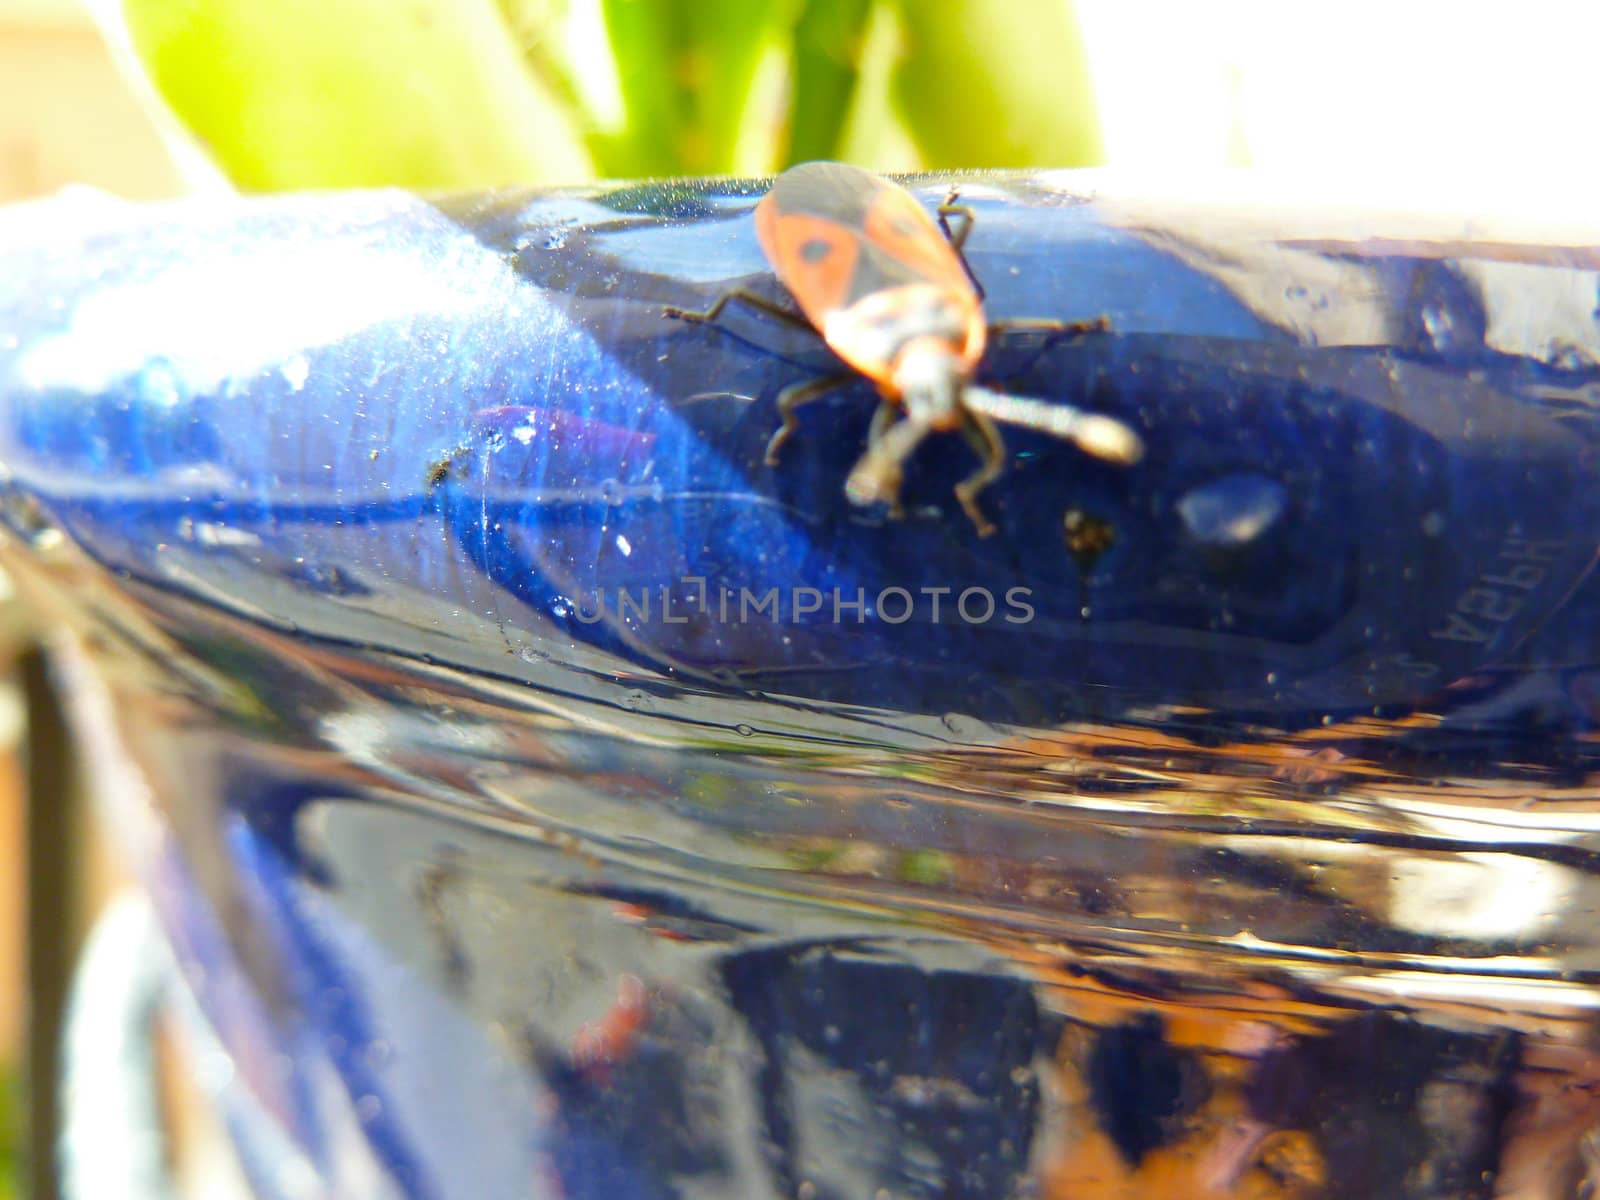 insect on the rim of a glazed pot